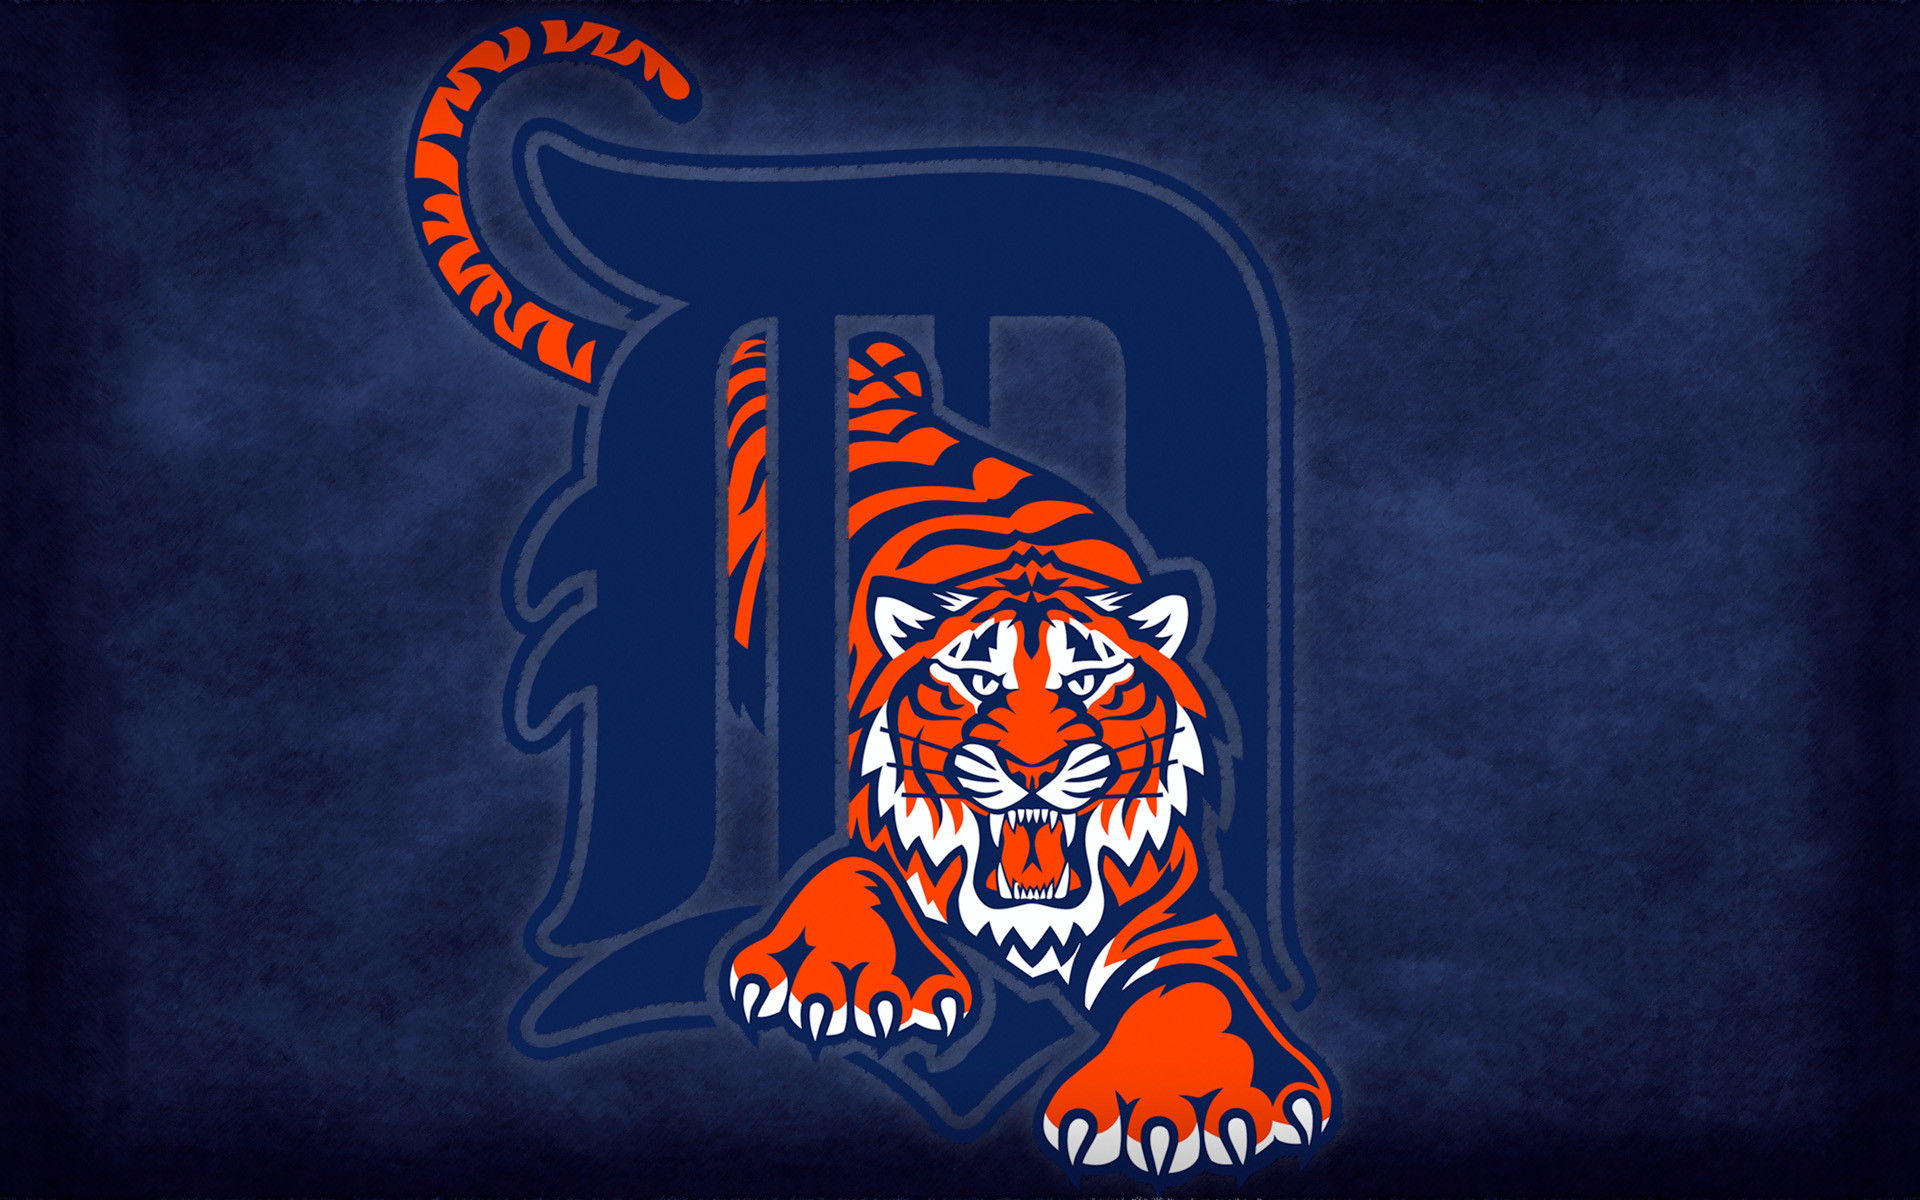 DETROIT TIGERS LOGO iPhone 5 wallpapers  Top iPhone 5 Wallpaperscom  Detroit  tigers Detroit Tiger images